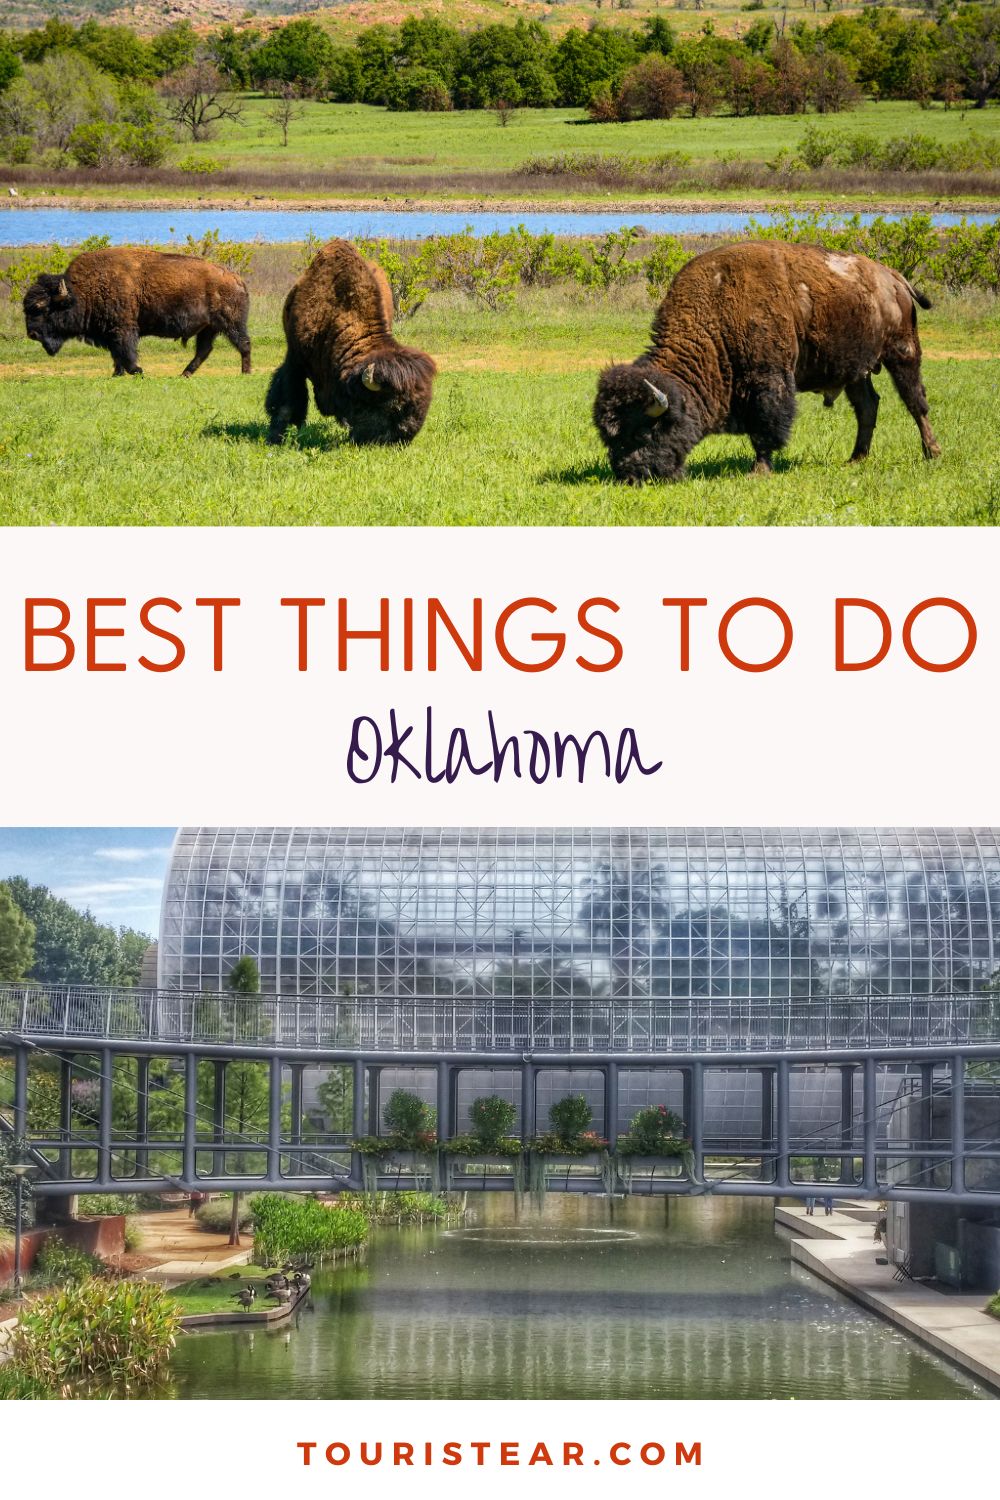 Best Things to Do in Oklahoma pin cover for pinterest.